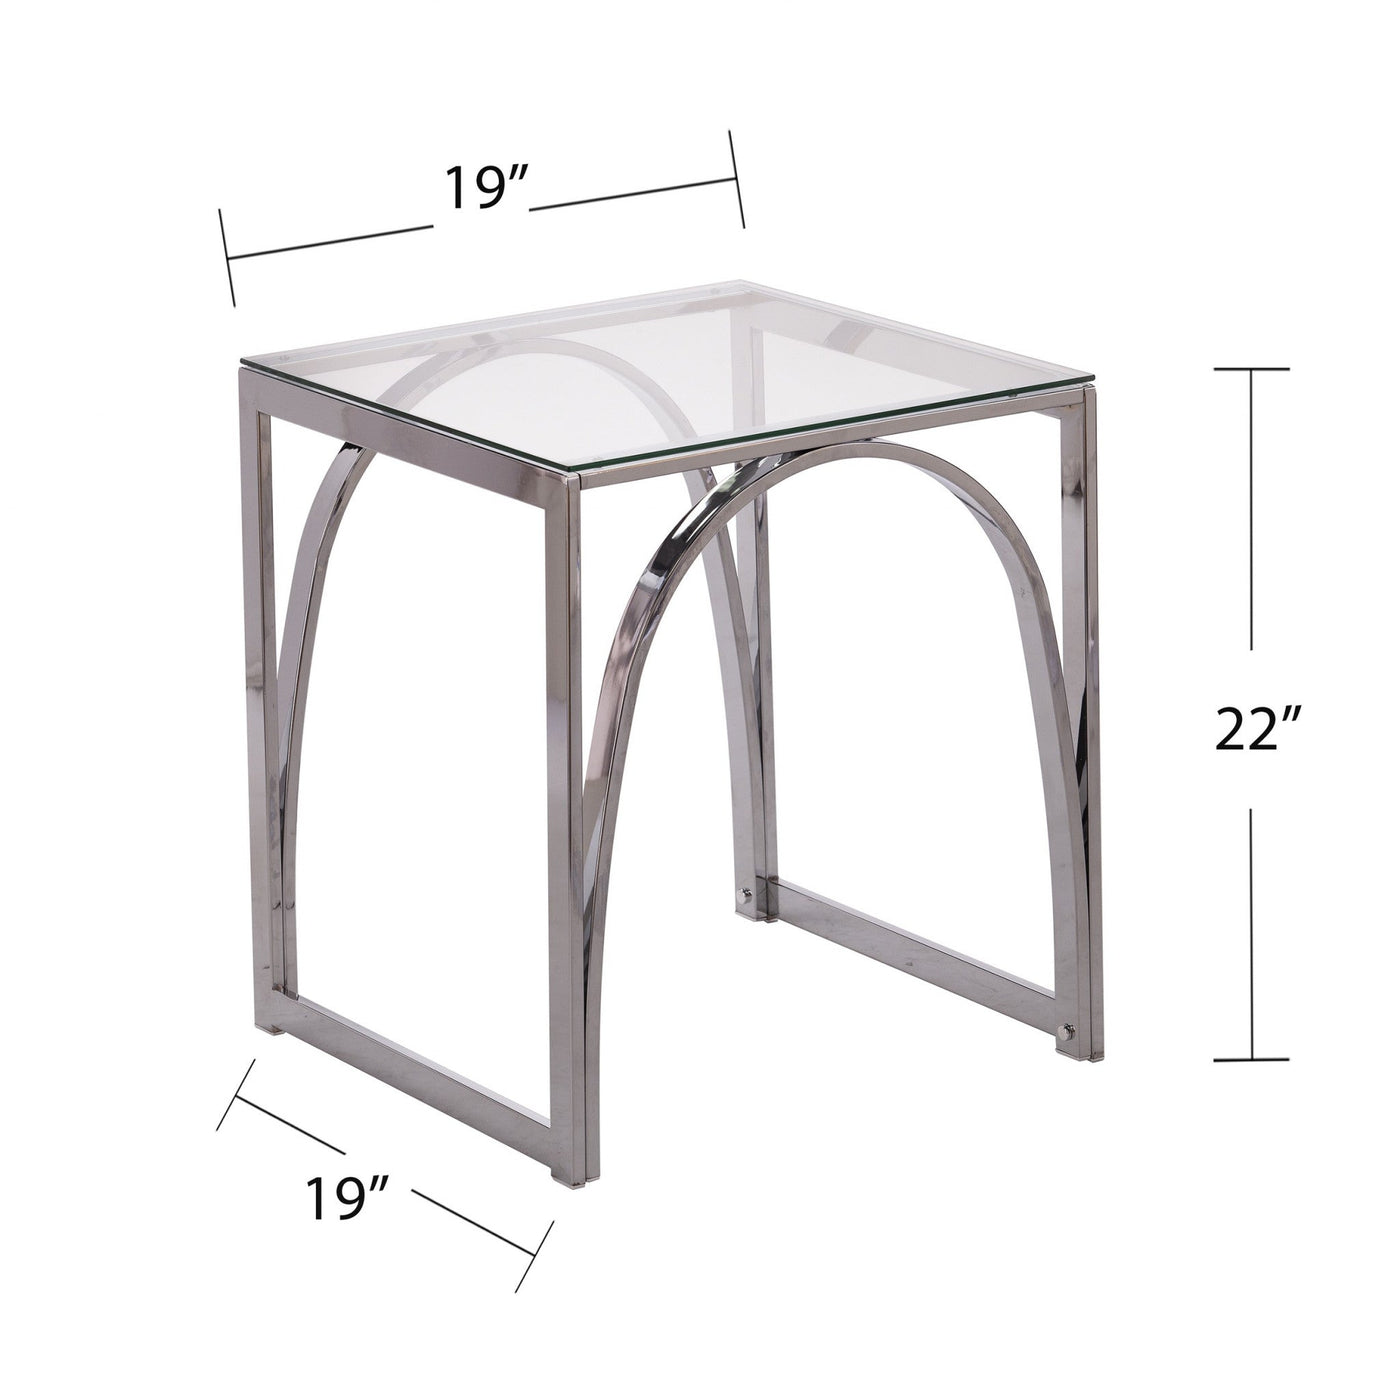 22’ Chrome Glass And Iron Square End Table - End-Side Tables